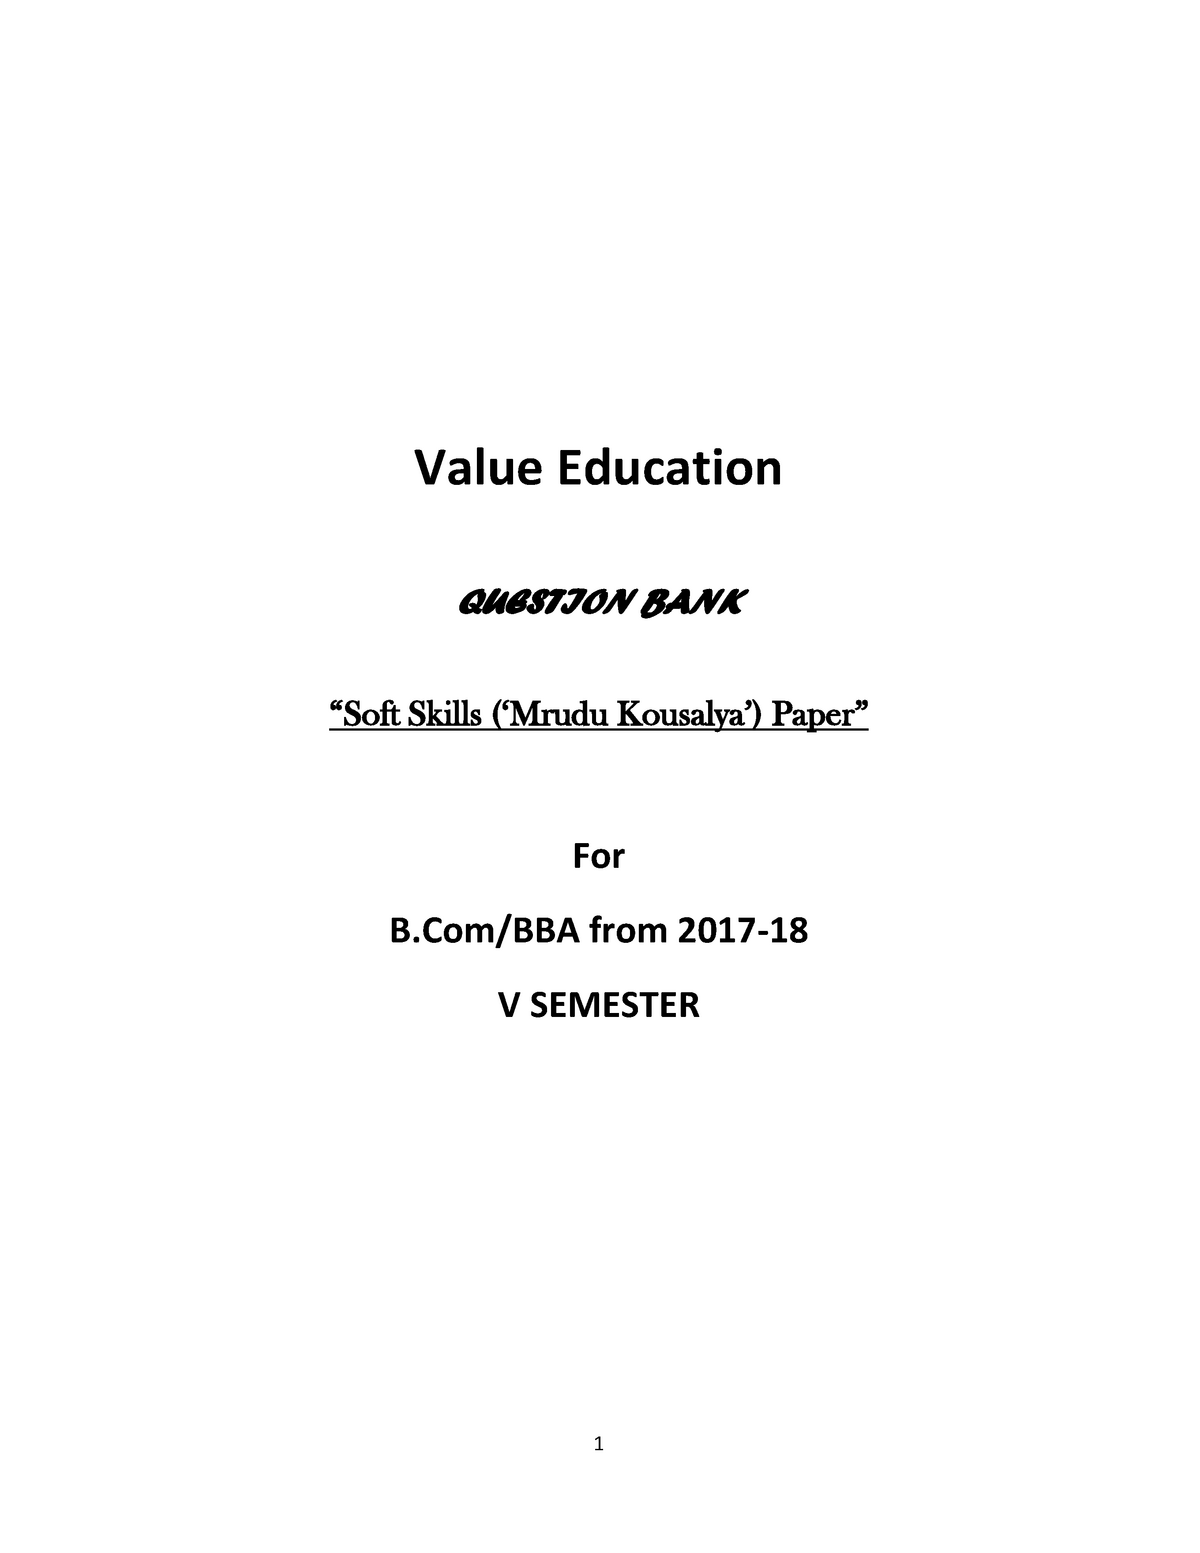 question paper on value education